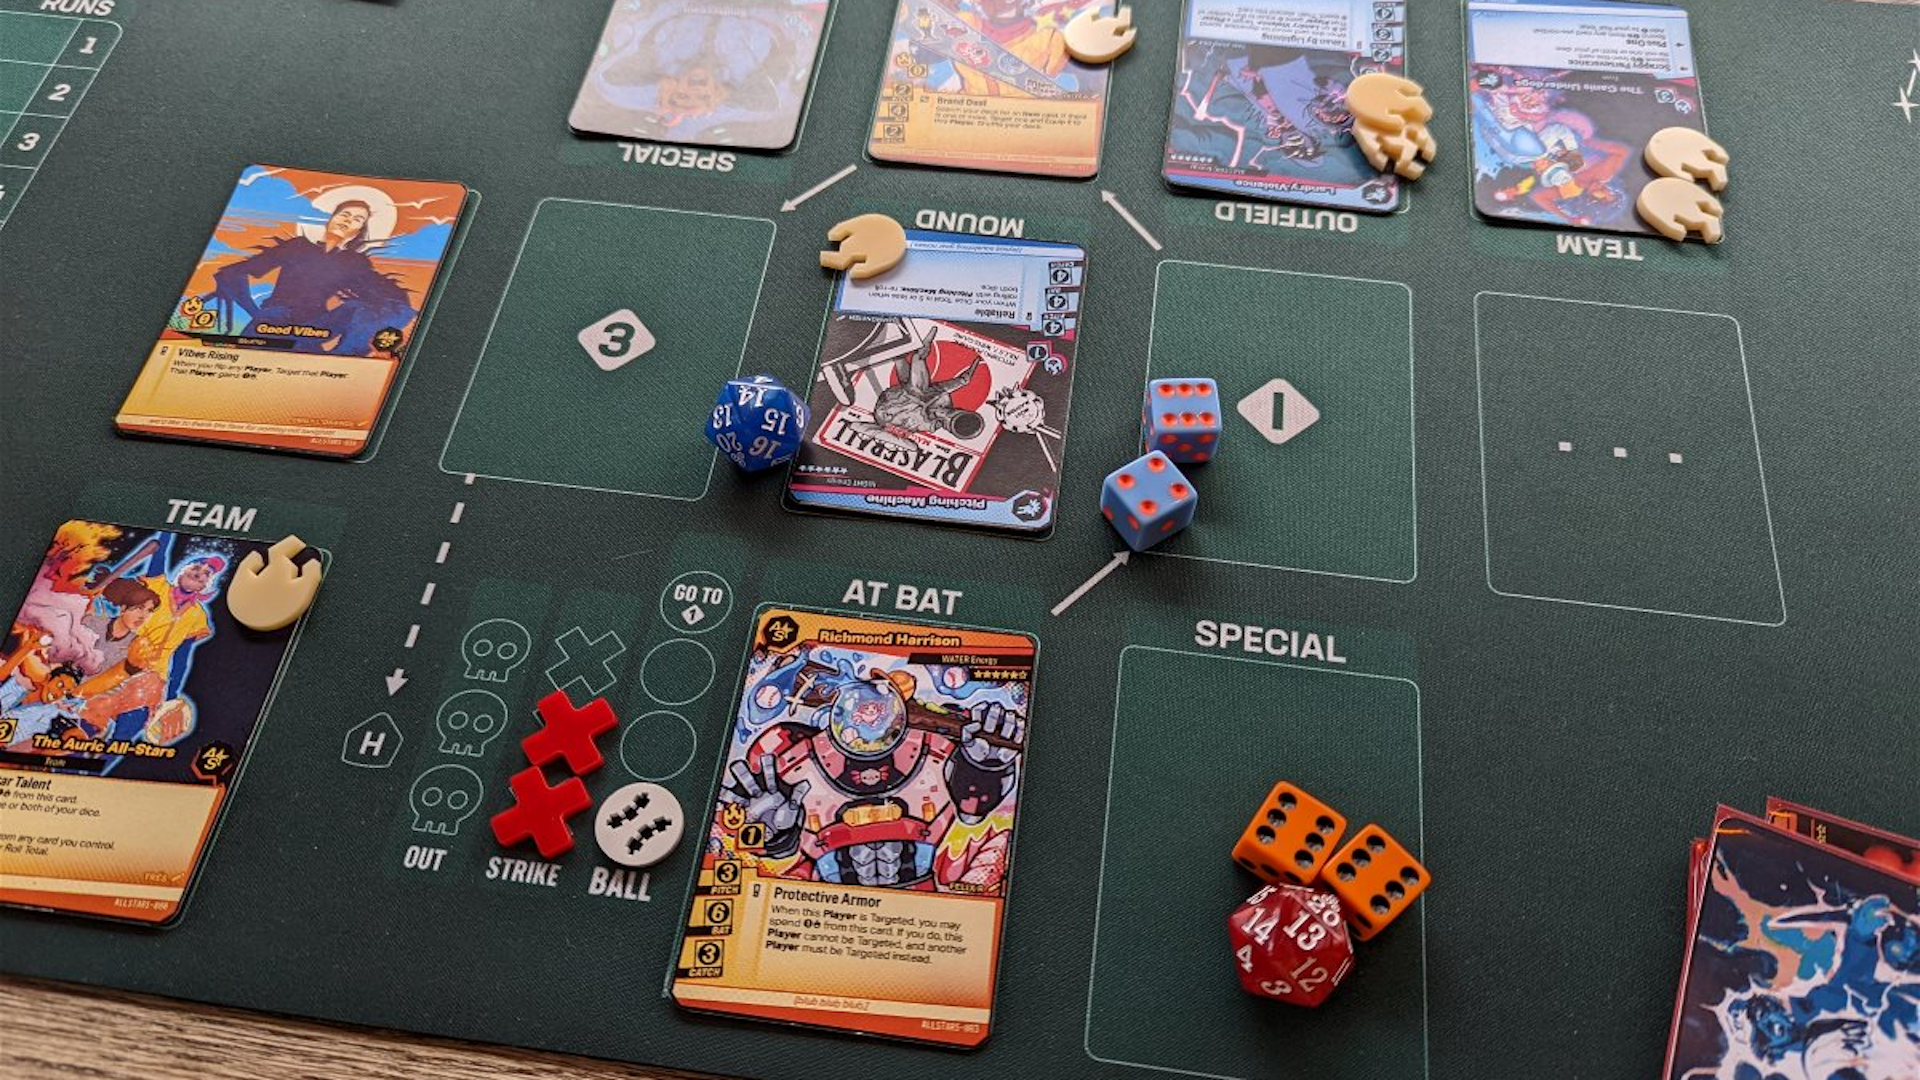 The field during a match of Blaseball: The Card Game will have players from both team fielding athletes, weird abilities and impossible weather.